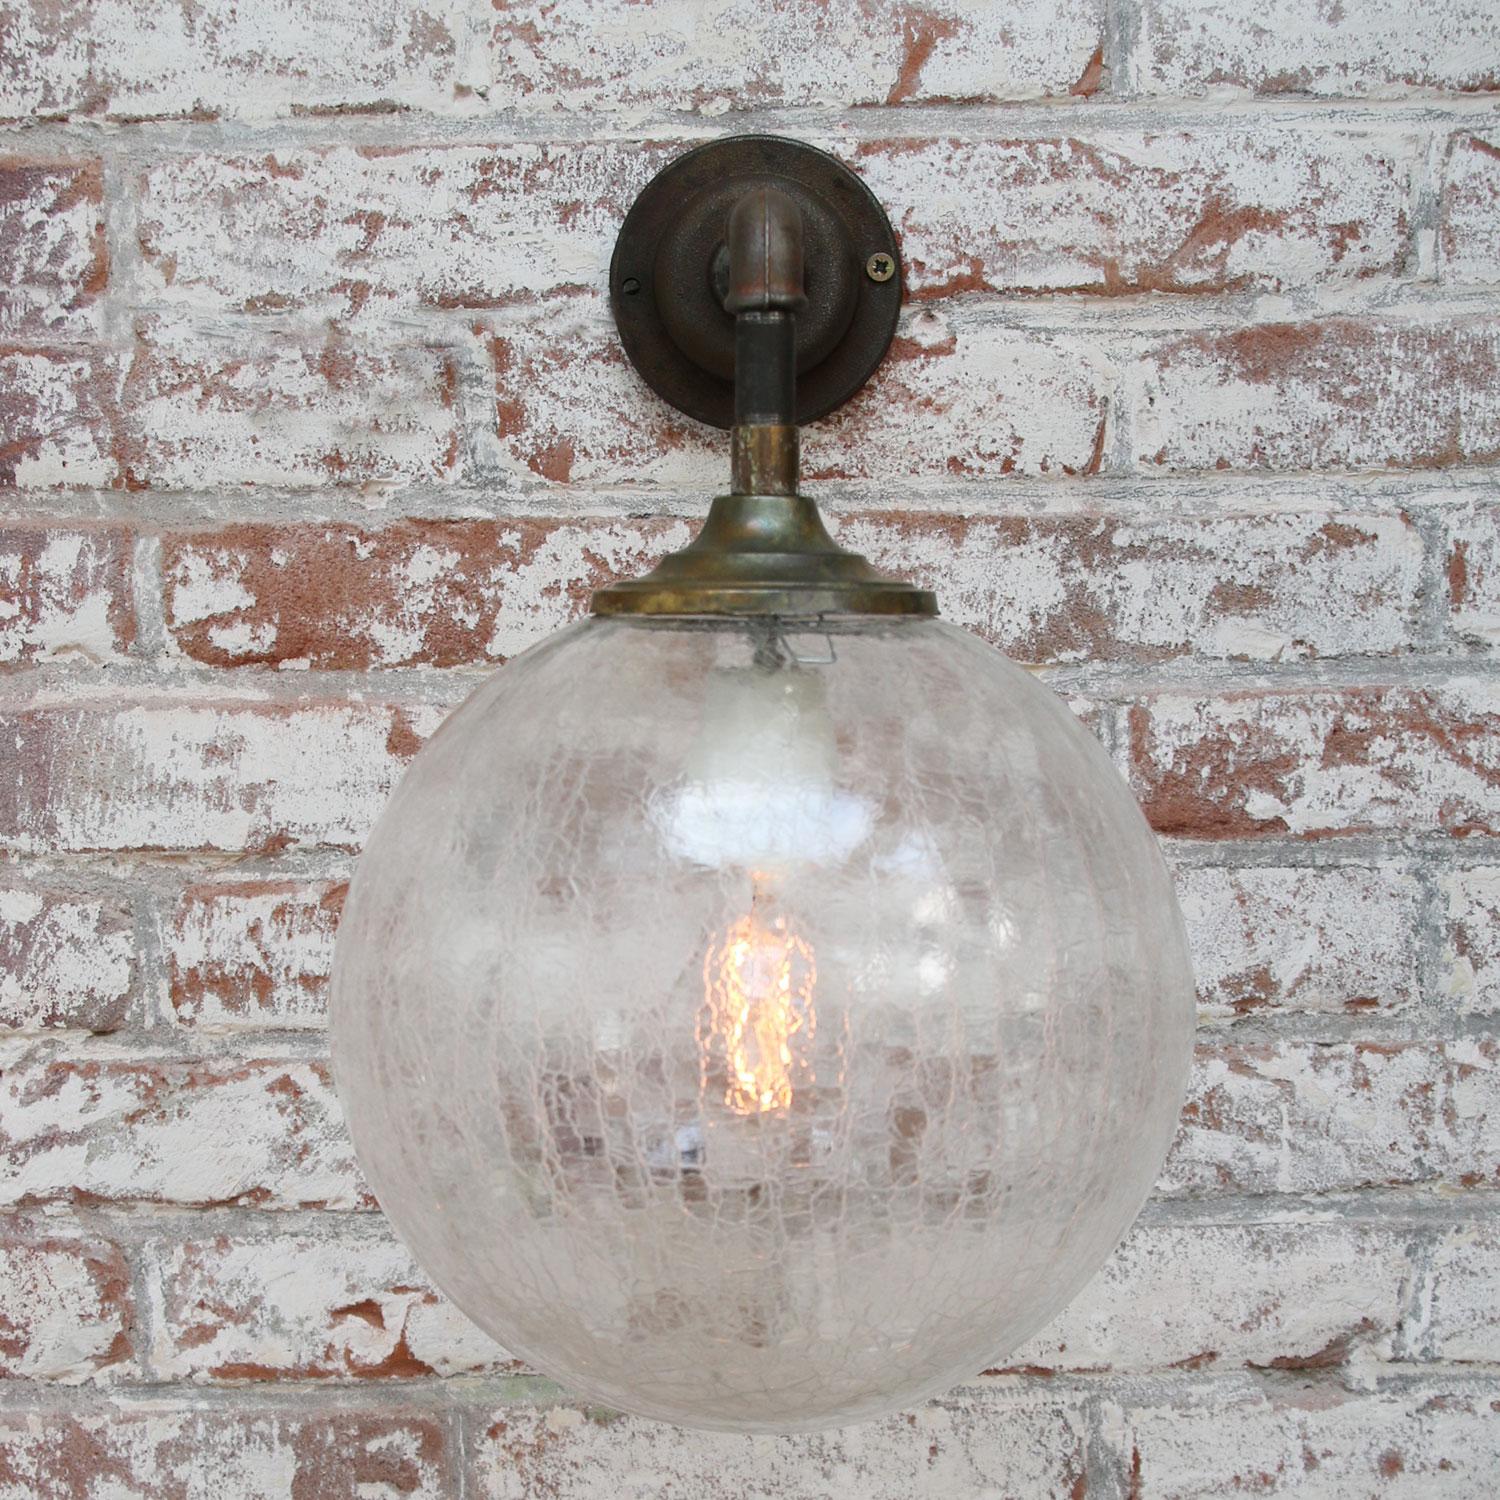 Brass and cast iron industrial wall light
clear texture glass globe

Diameter cast iron wall piece: 10.5 cm / 4”, 2 holes to secure

Weight: 2.30 kg / 5.1 lb

Priced per individual item. All lamps have been made suitable by international standards